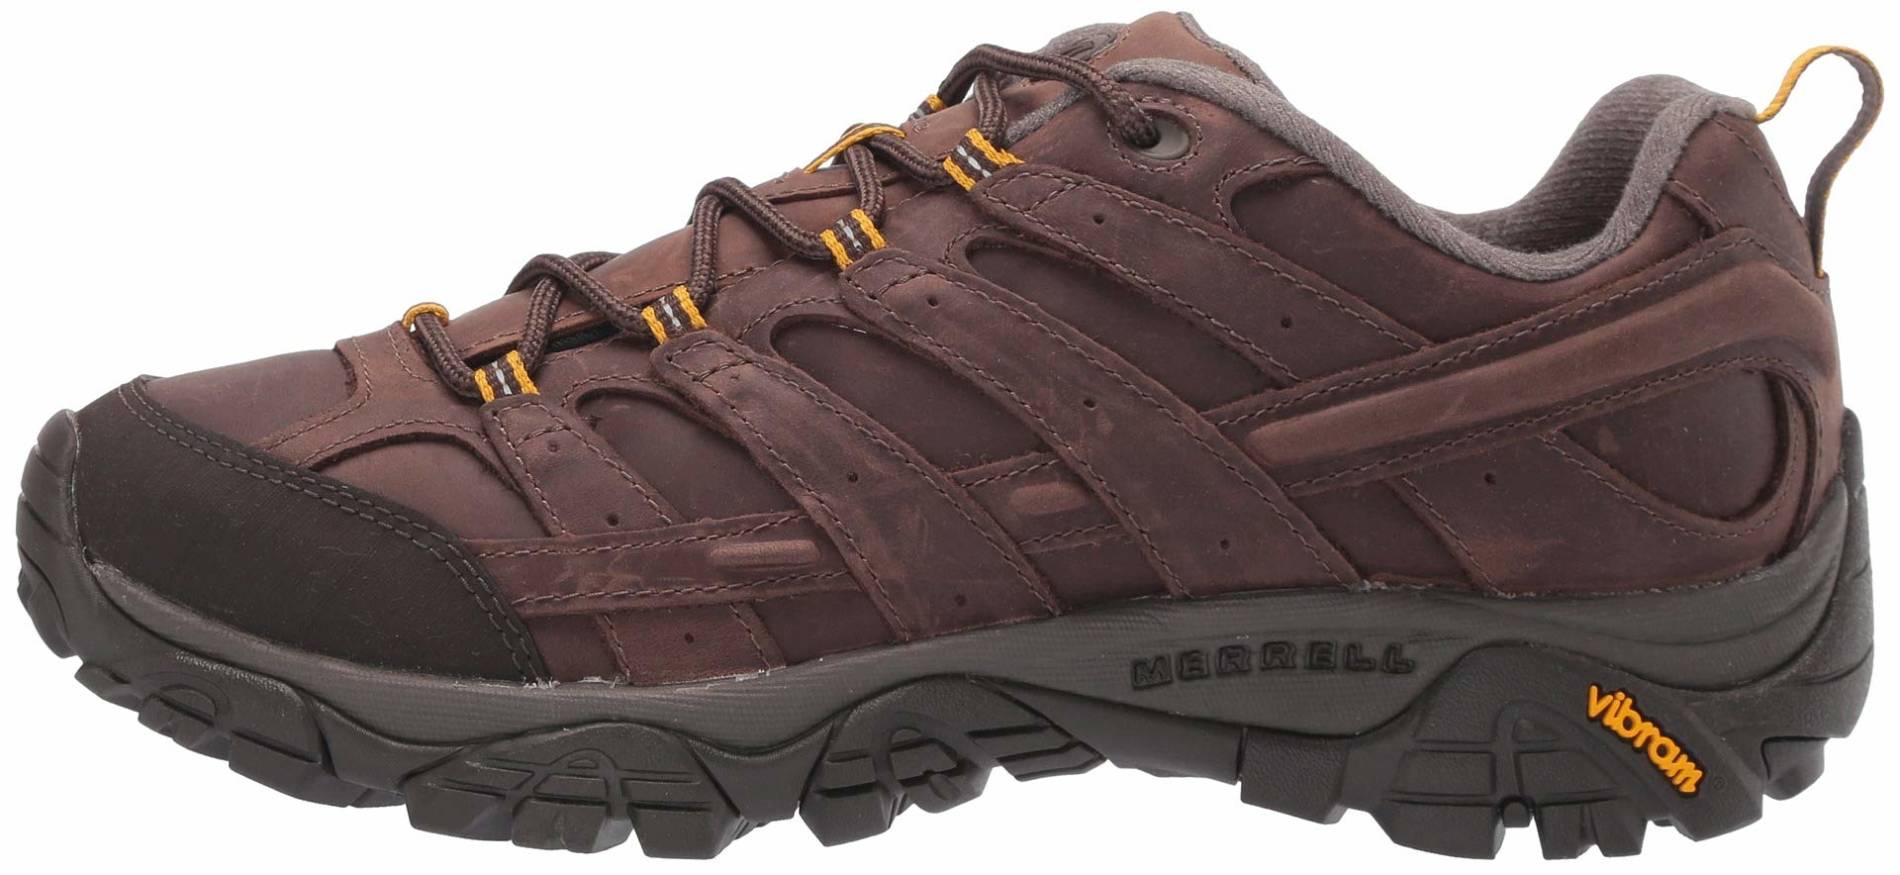 Review of Merrell Moab 2 Prime 